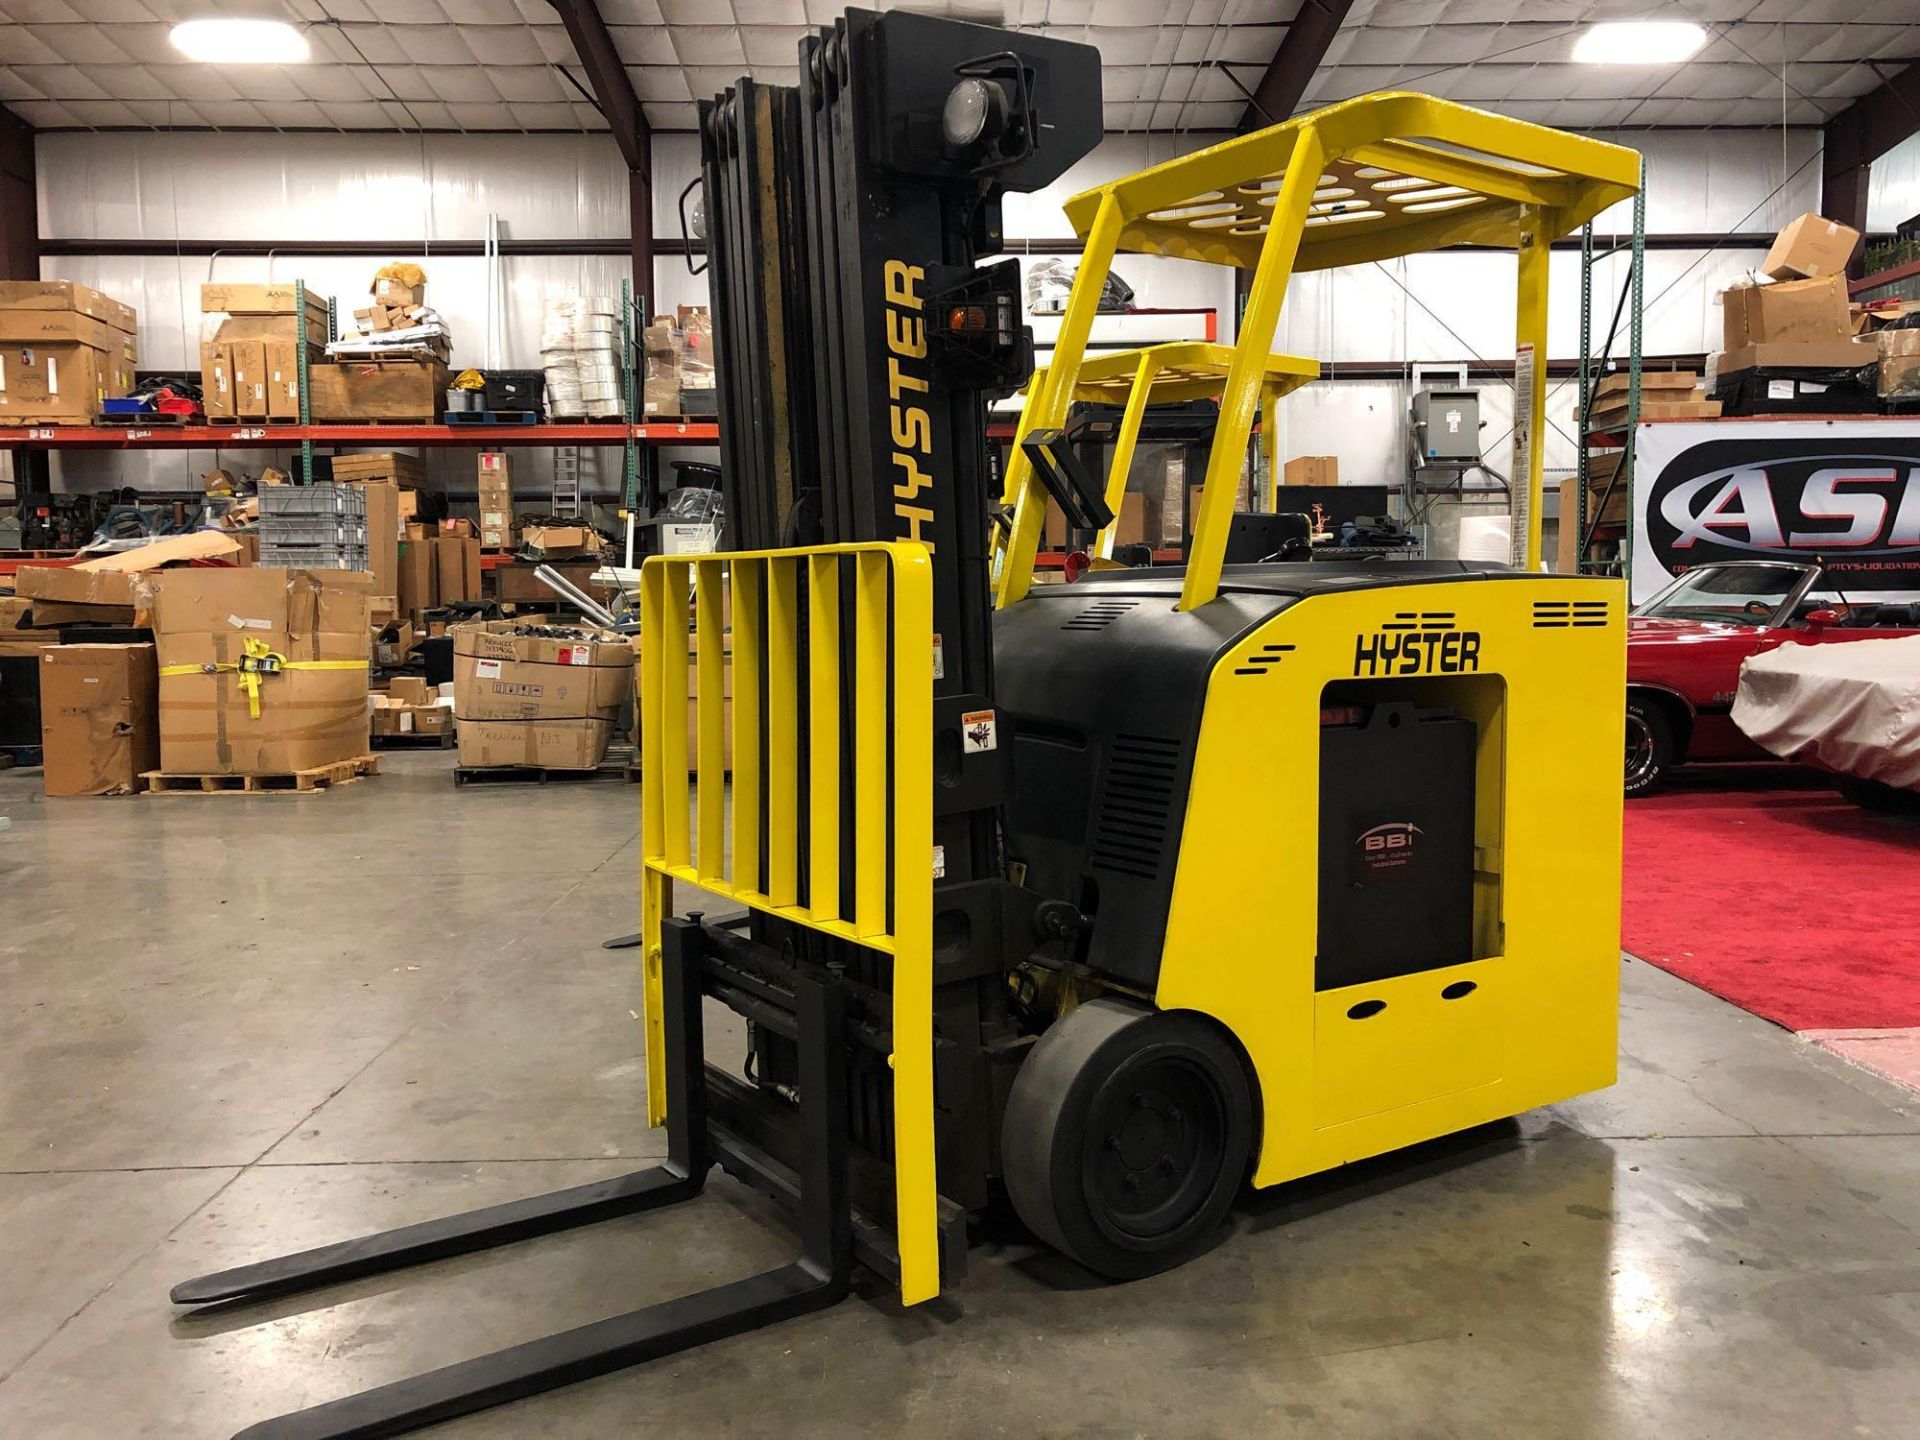 HYSTER E40HSD ELECTRIC FORKLIFT, APPROX. 4,000 LB LIFT CAPACITY, QUAD STAGE MAST - Image 2 of 6